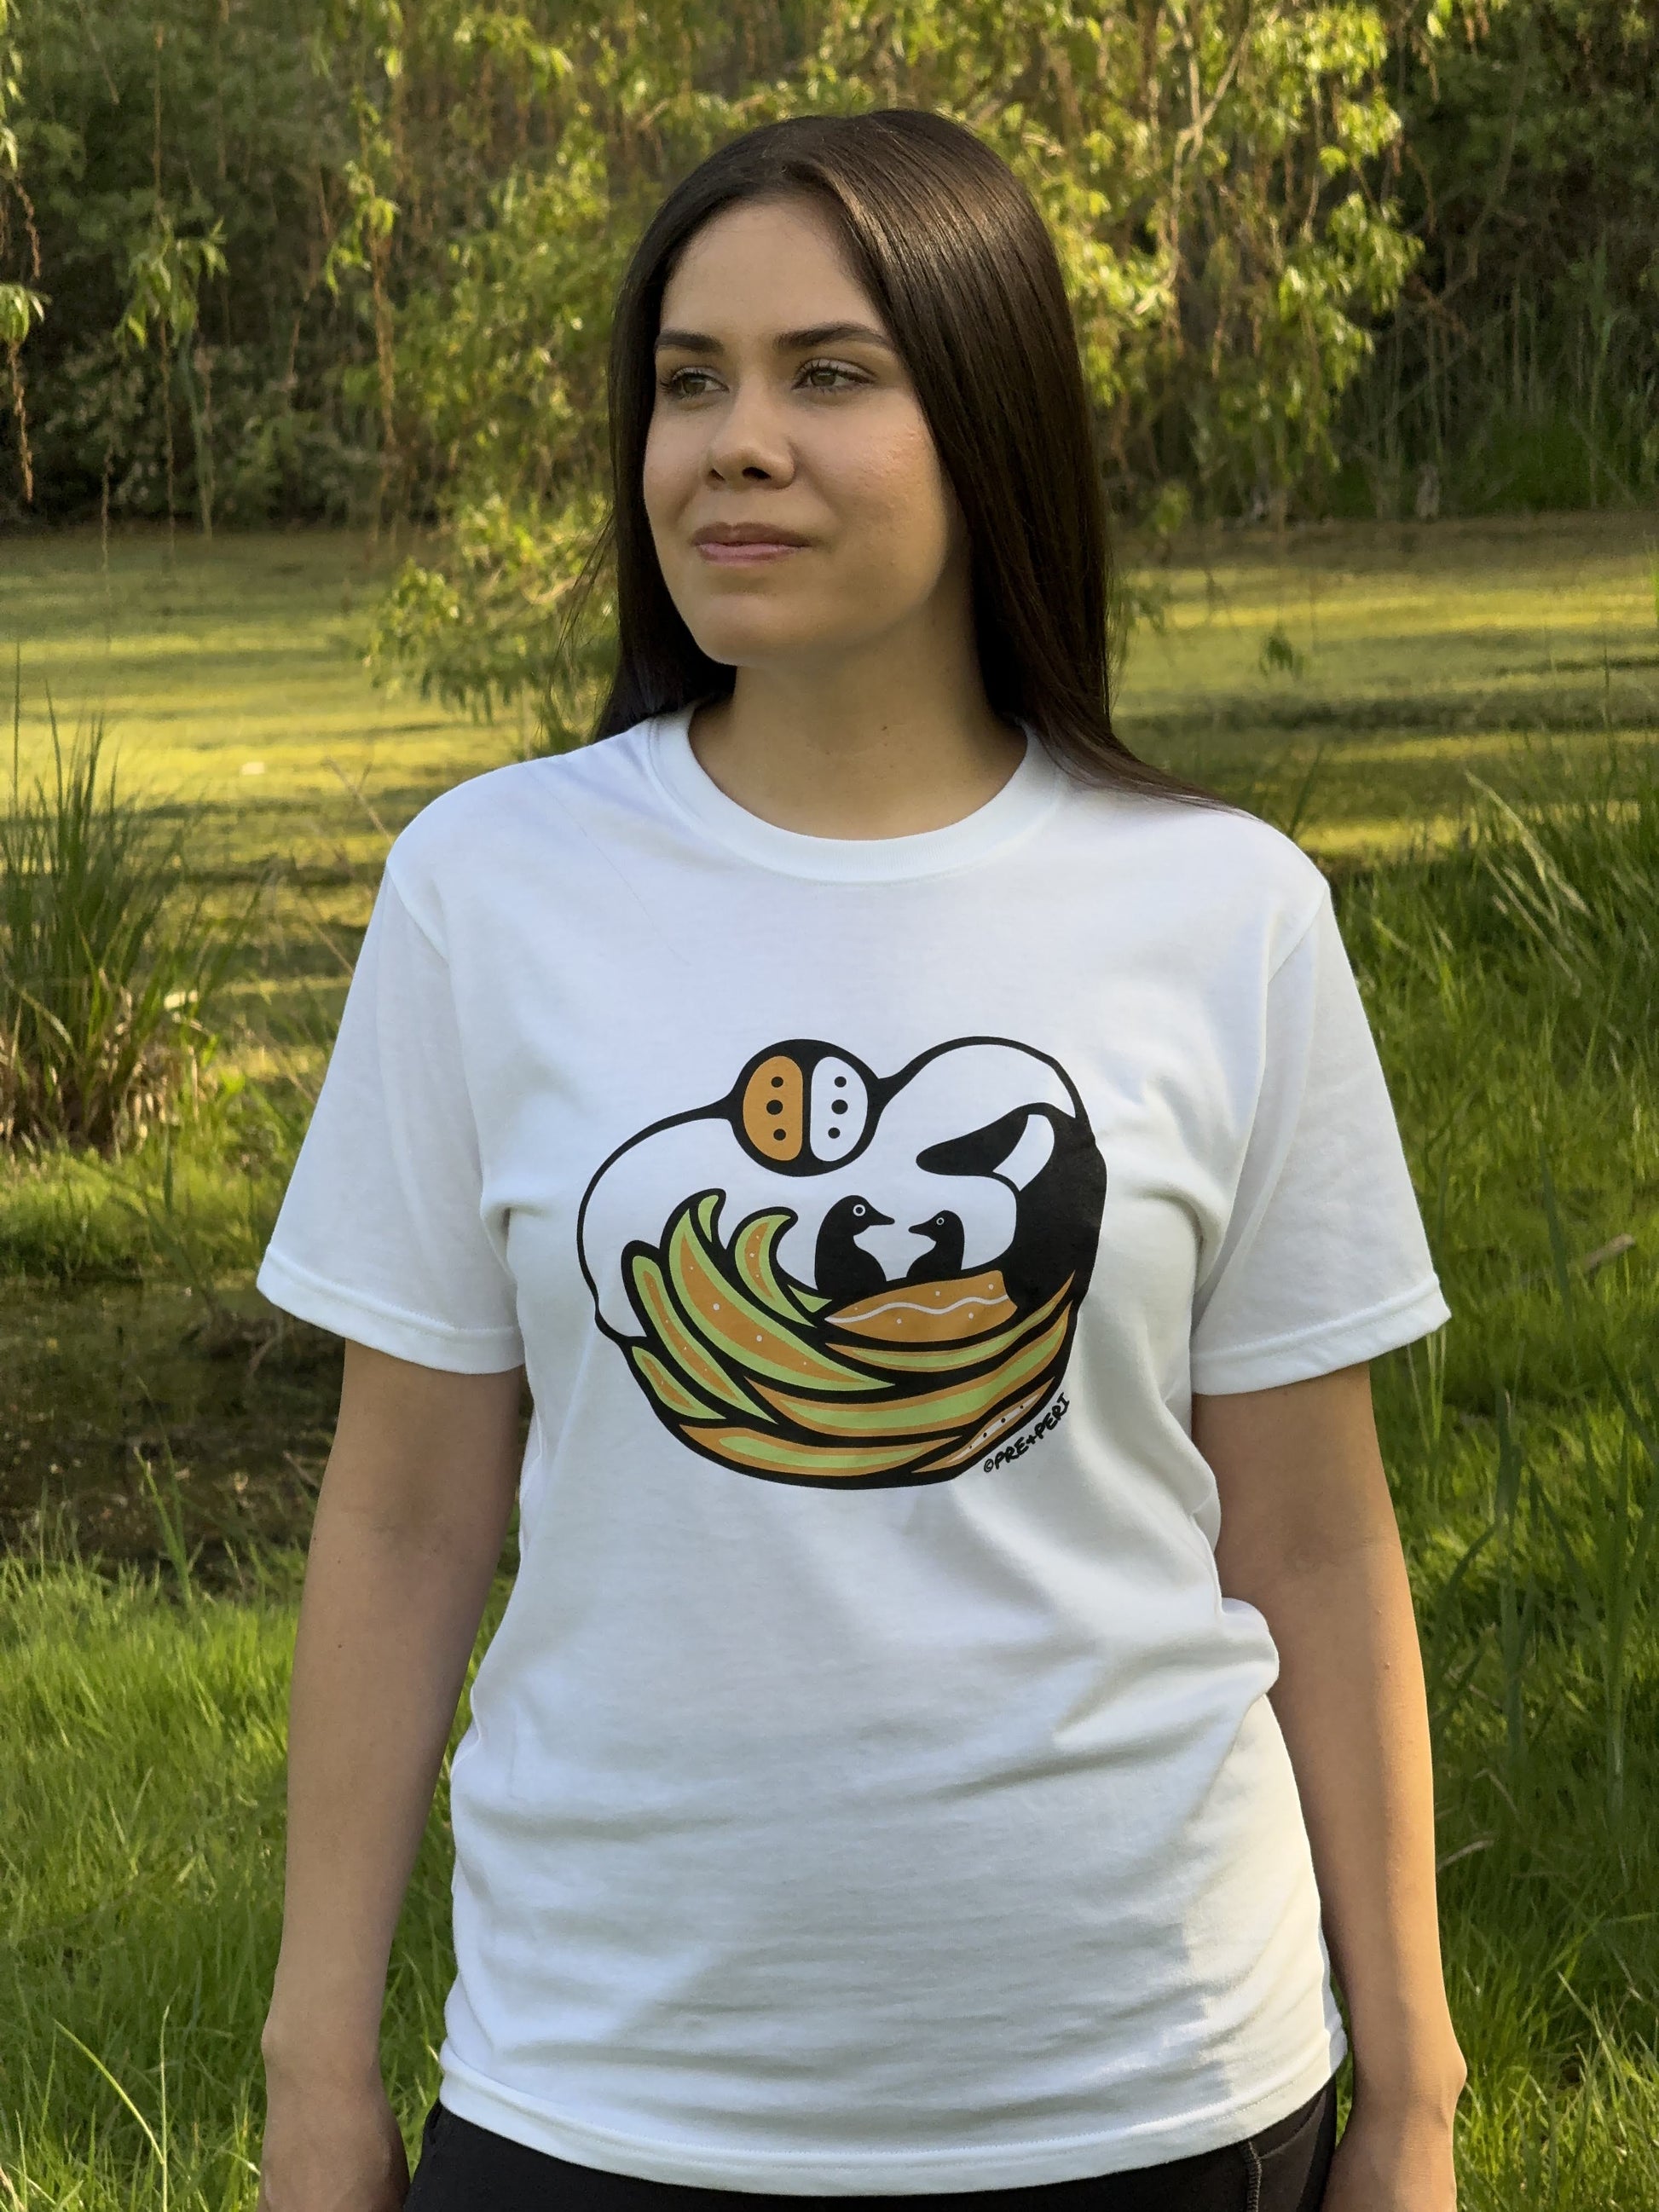 A woman wearing a white t-shirt with a Woodland Art style Canada Goose design. The mother goose is keeping her two babies safe in her wings.